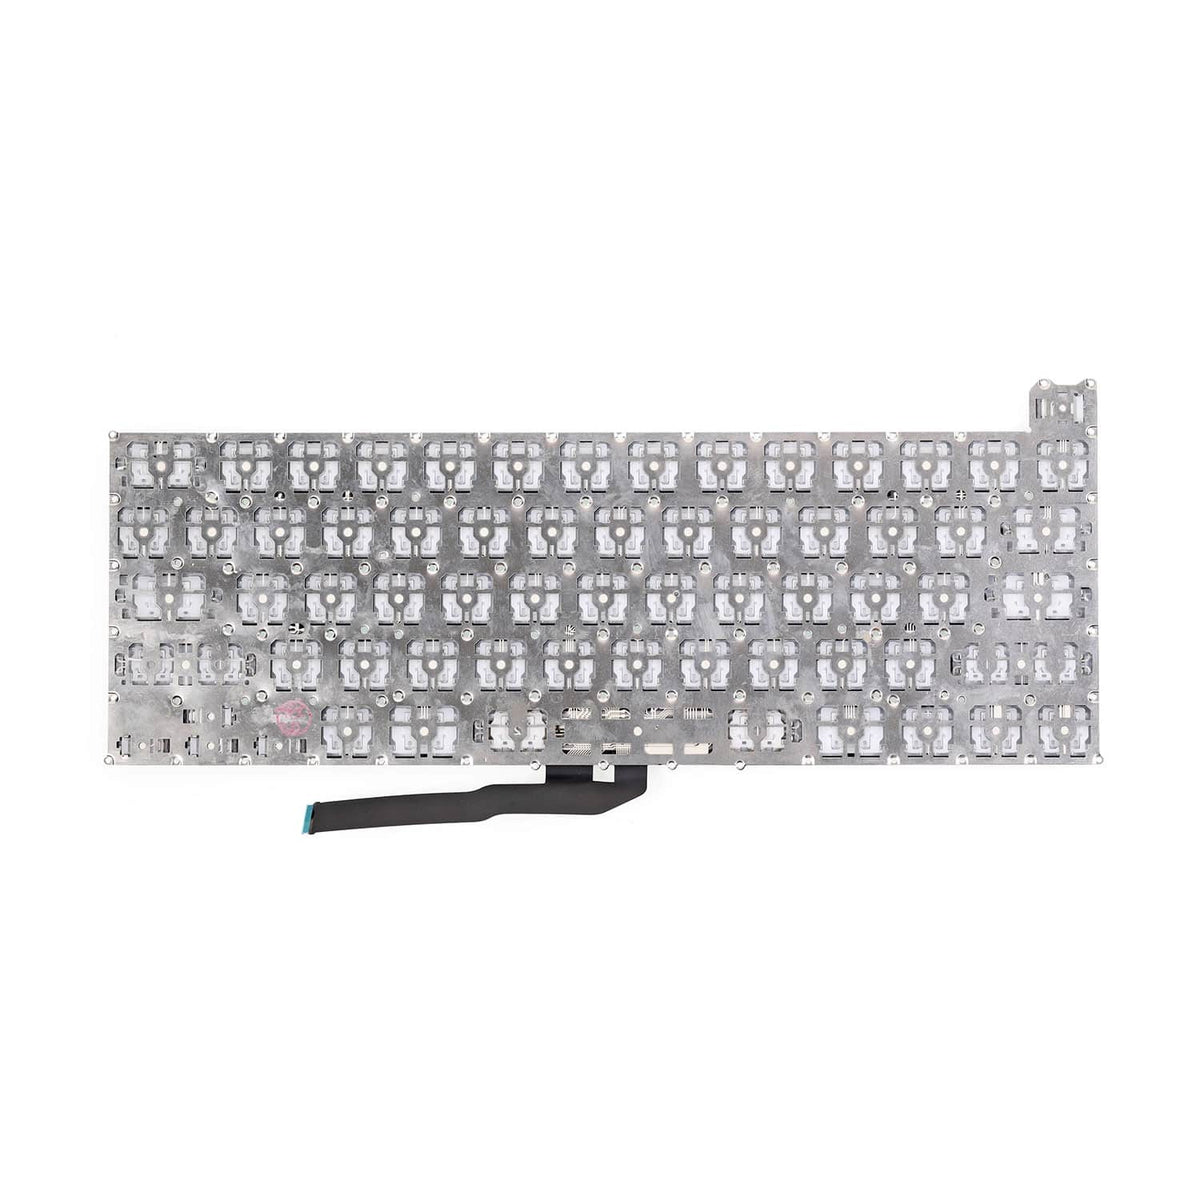 KEYBOARD (US ENGLISH) FOR MACBOOK PRO RETINA 13" A2251 EARLY 2020